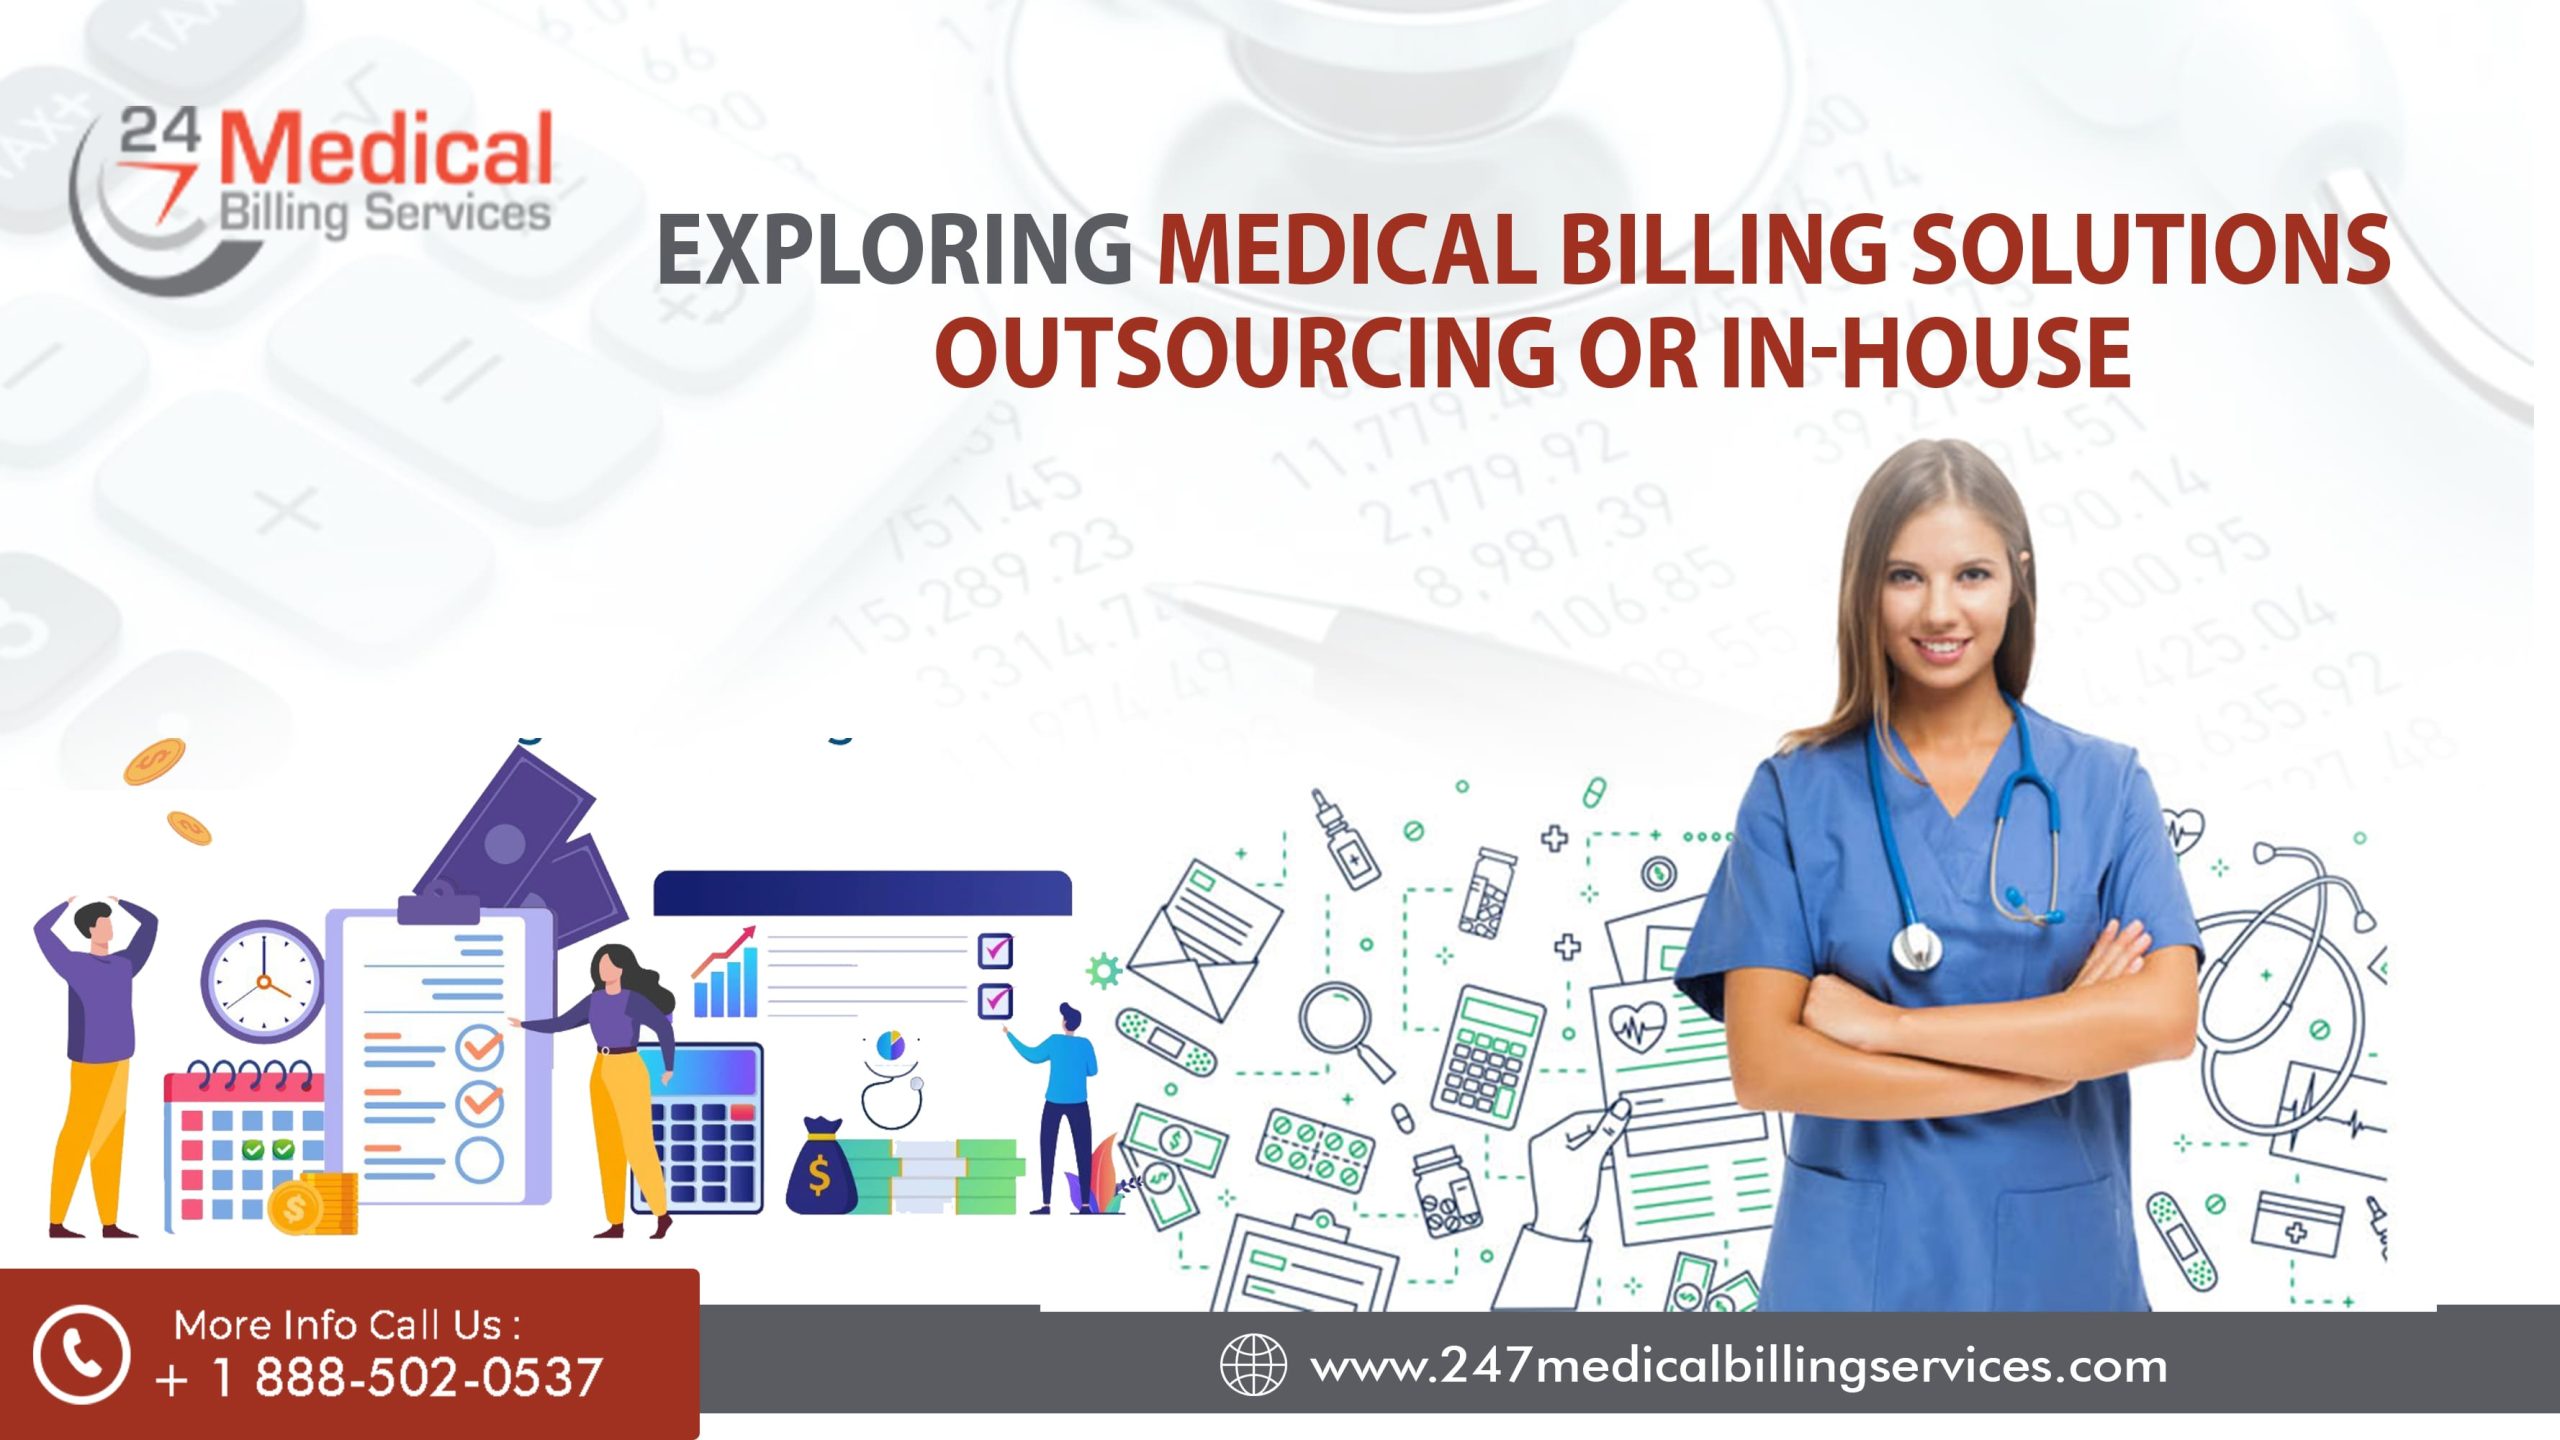  Exploring Medical Billing Solutions Outsourcing or In-House